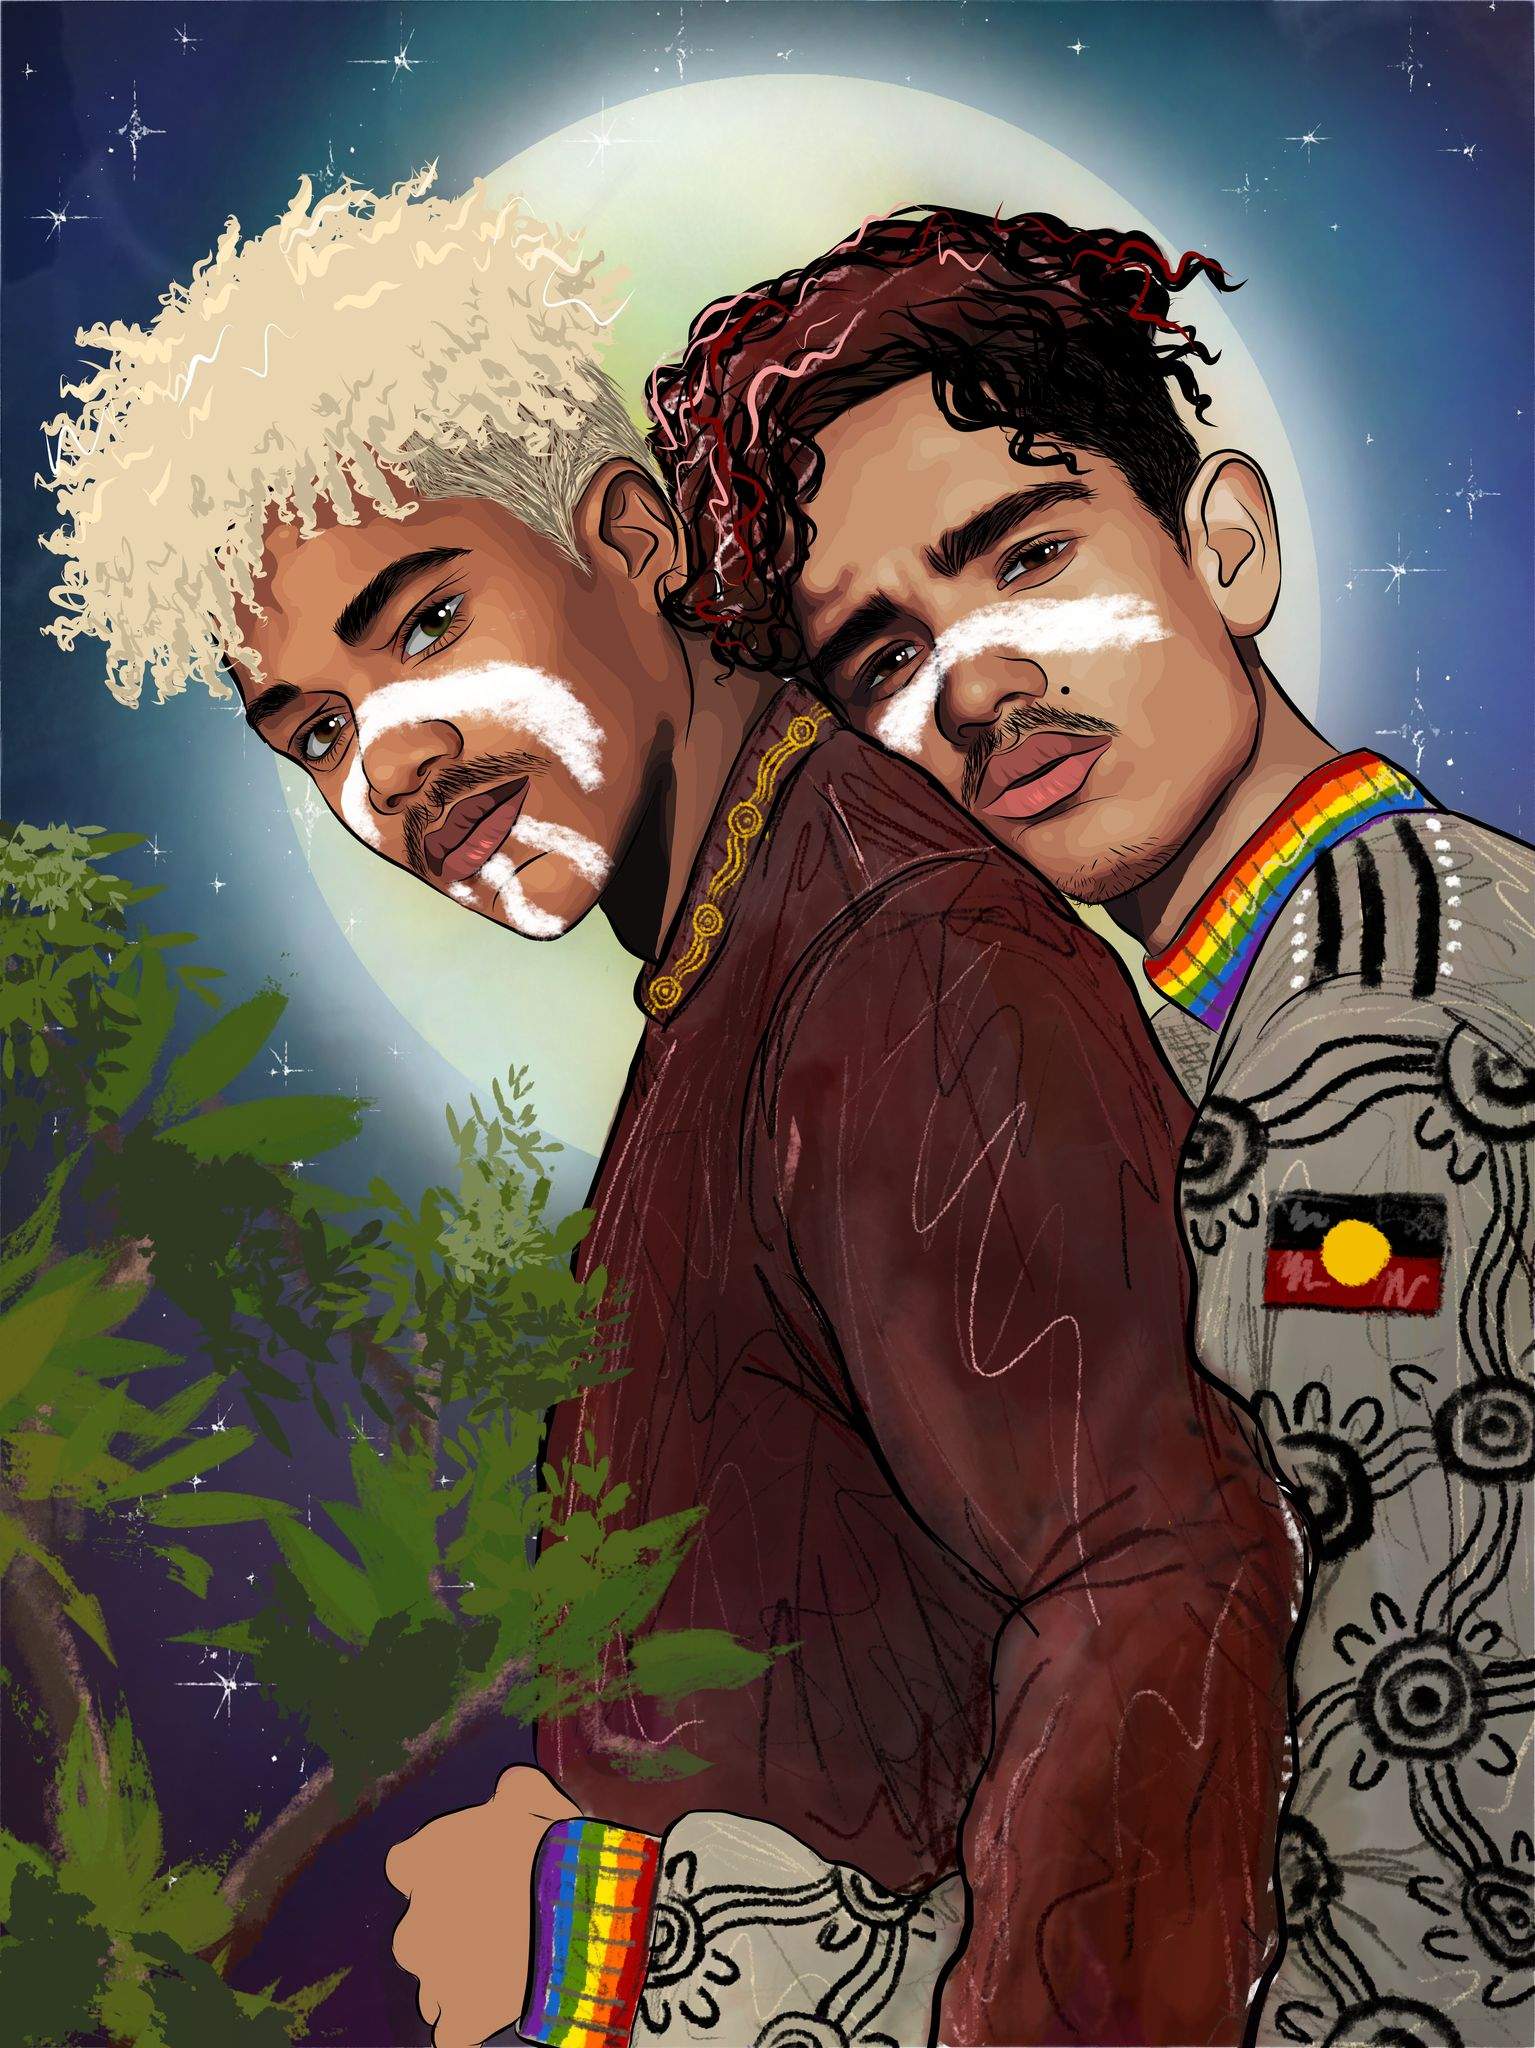 A digital illustration shows two men embracing and looking towards the viewer, wearing clothes with Indigenous and queer symbols